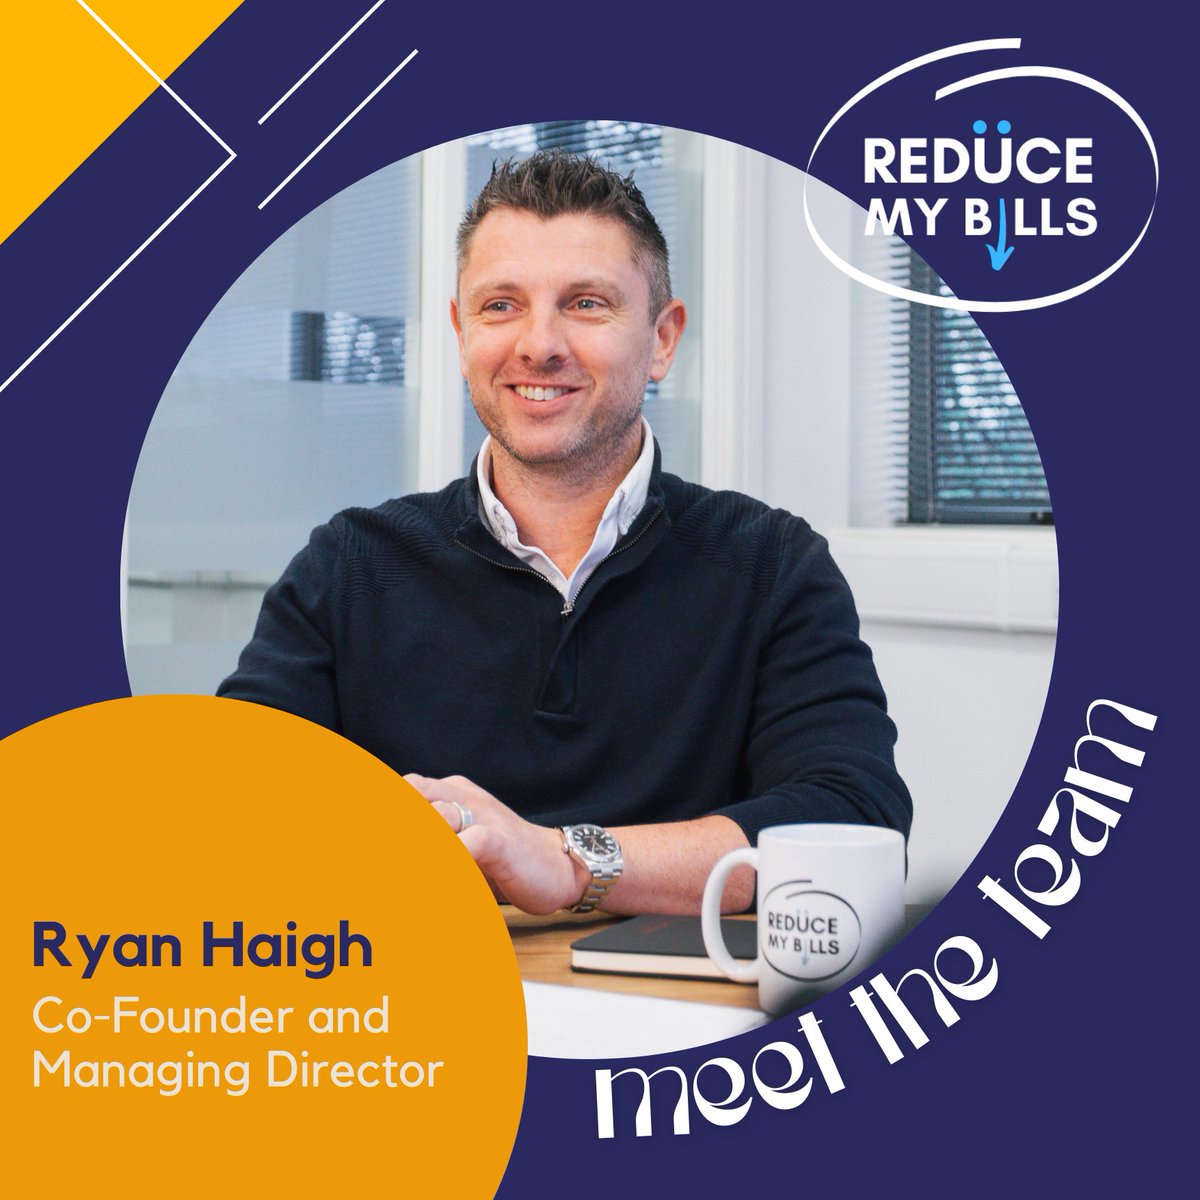 🌟 Meet @ryan_haigh, our Managing Director with 25+ years in utility brokering. His expertise drives innovation and efficiency, ensuring service excellence. Beyond work, he enjoys family time and golf. A true luminary shaping our future! #MeetTheTeam #RMBTeam